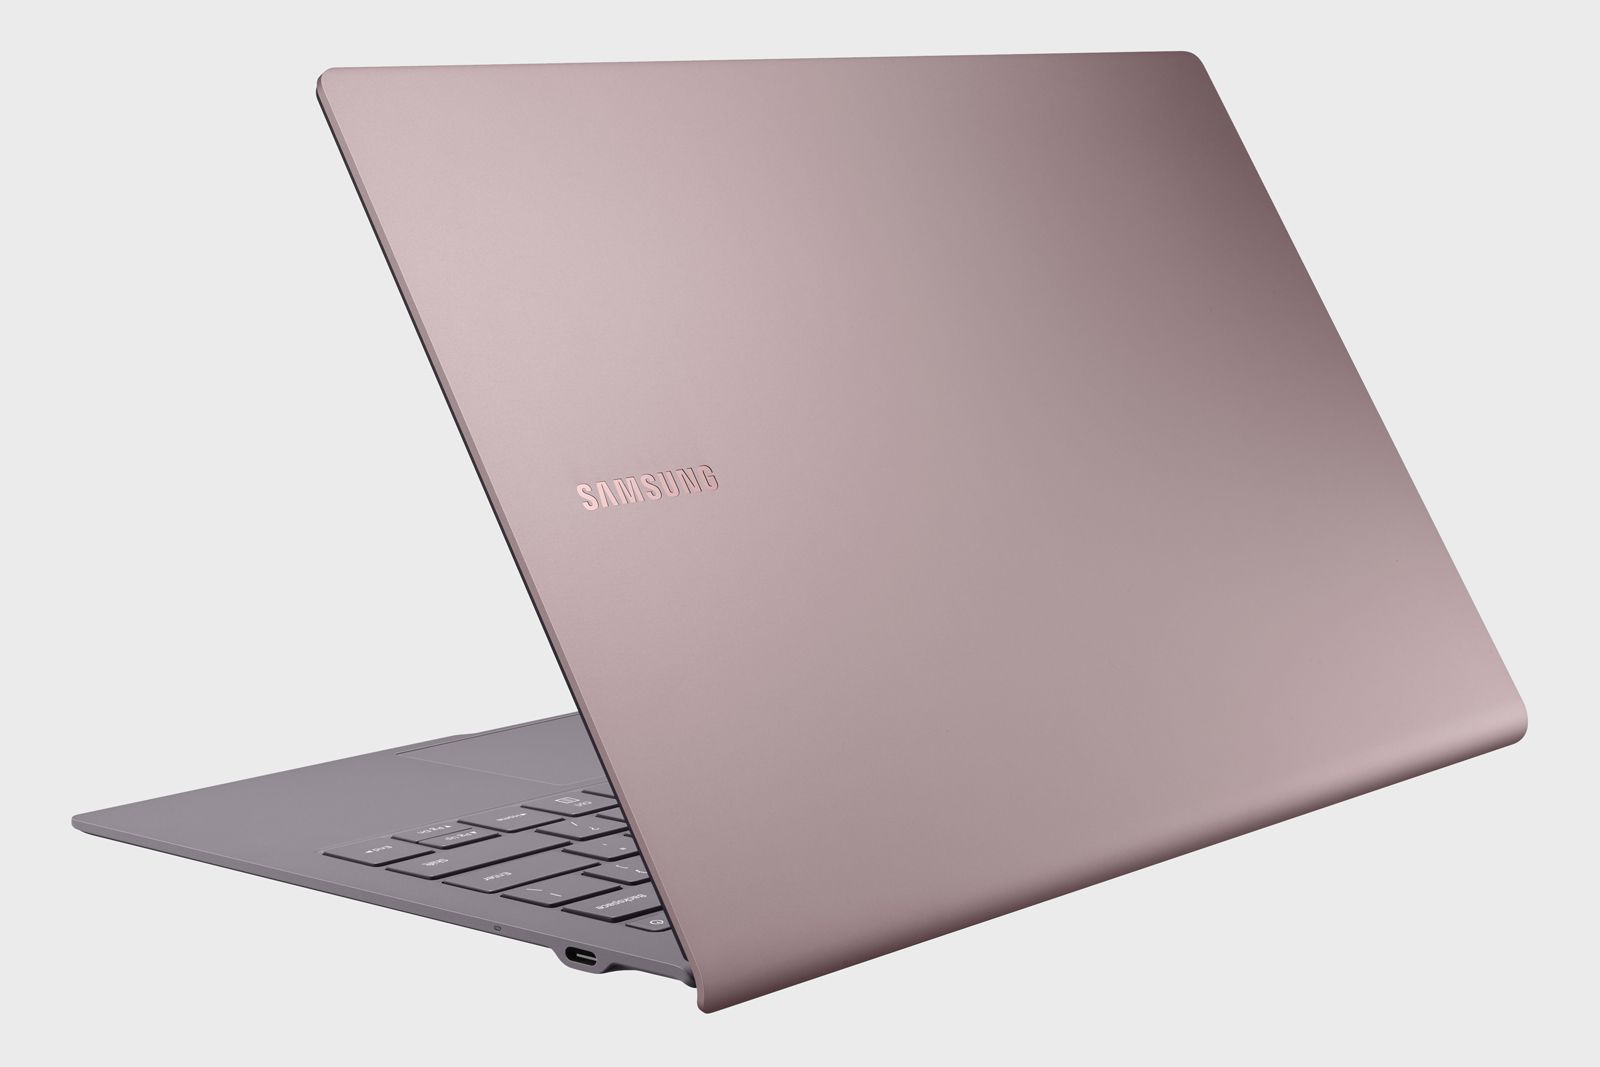 Samsungs ultraportable Galaxy Book S laptop is coming to the UK image 1